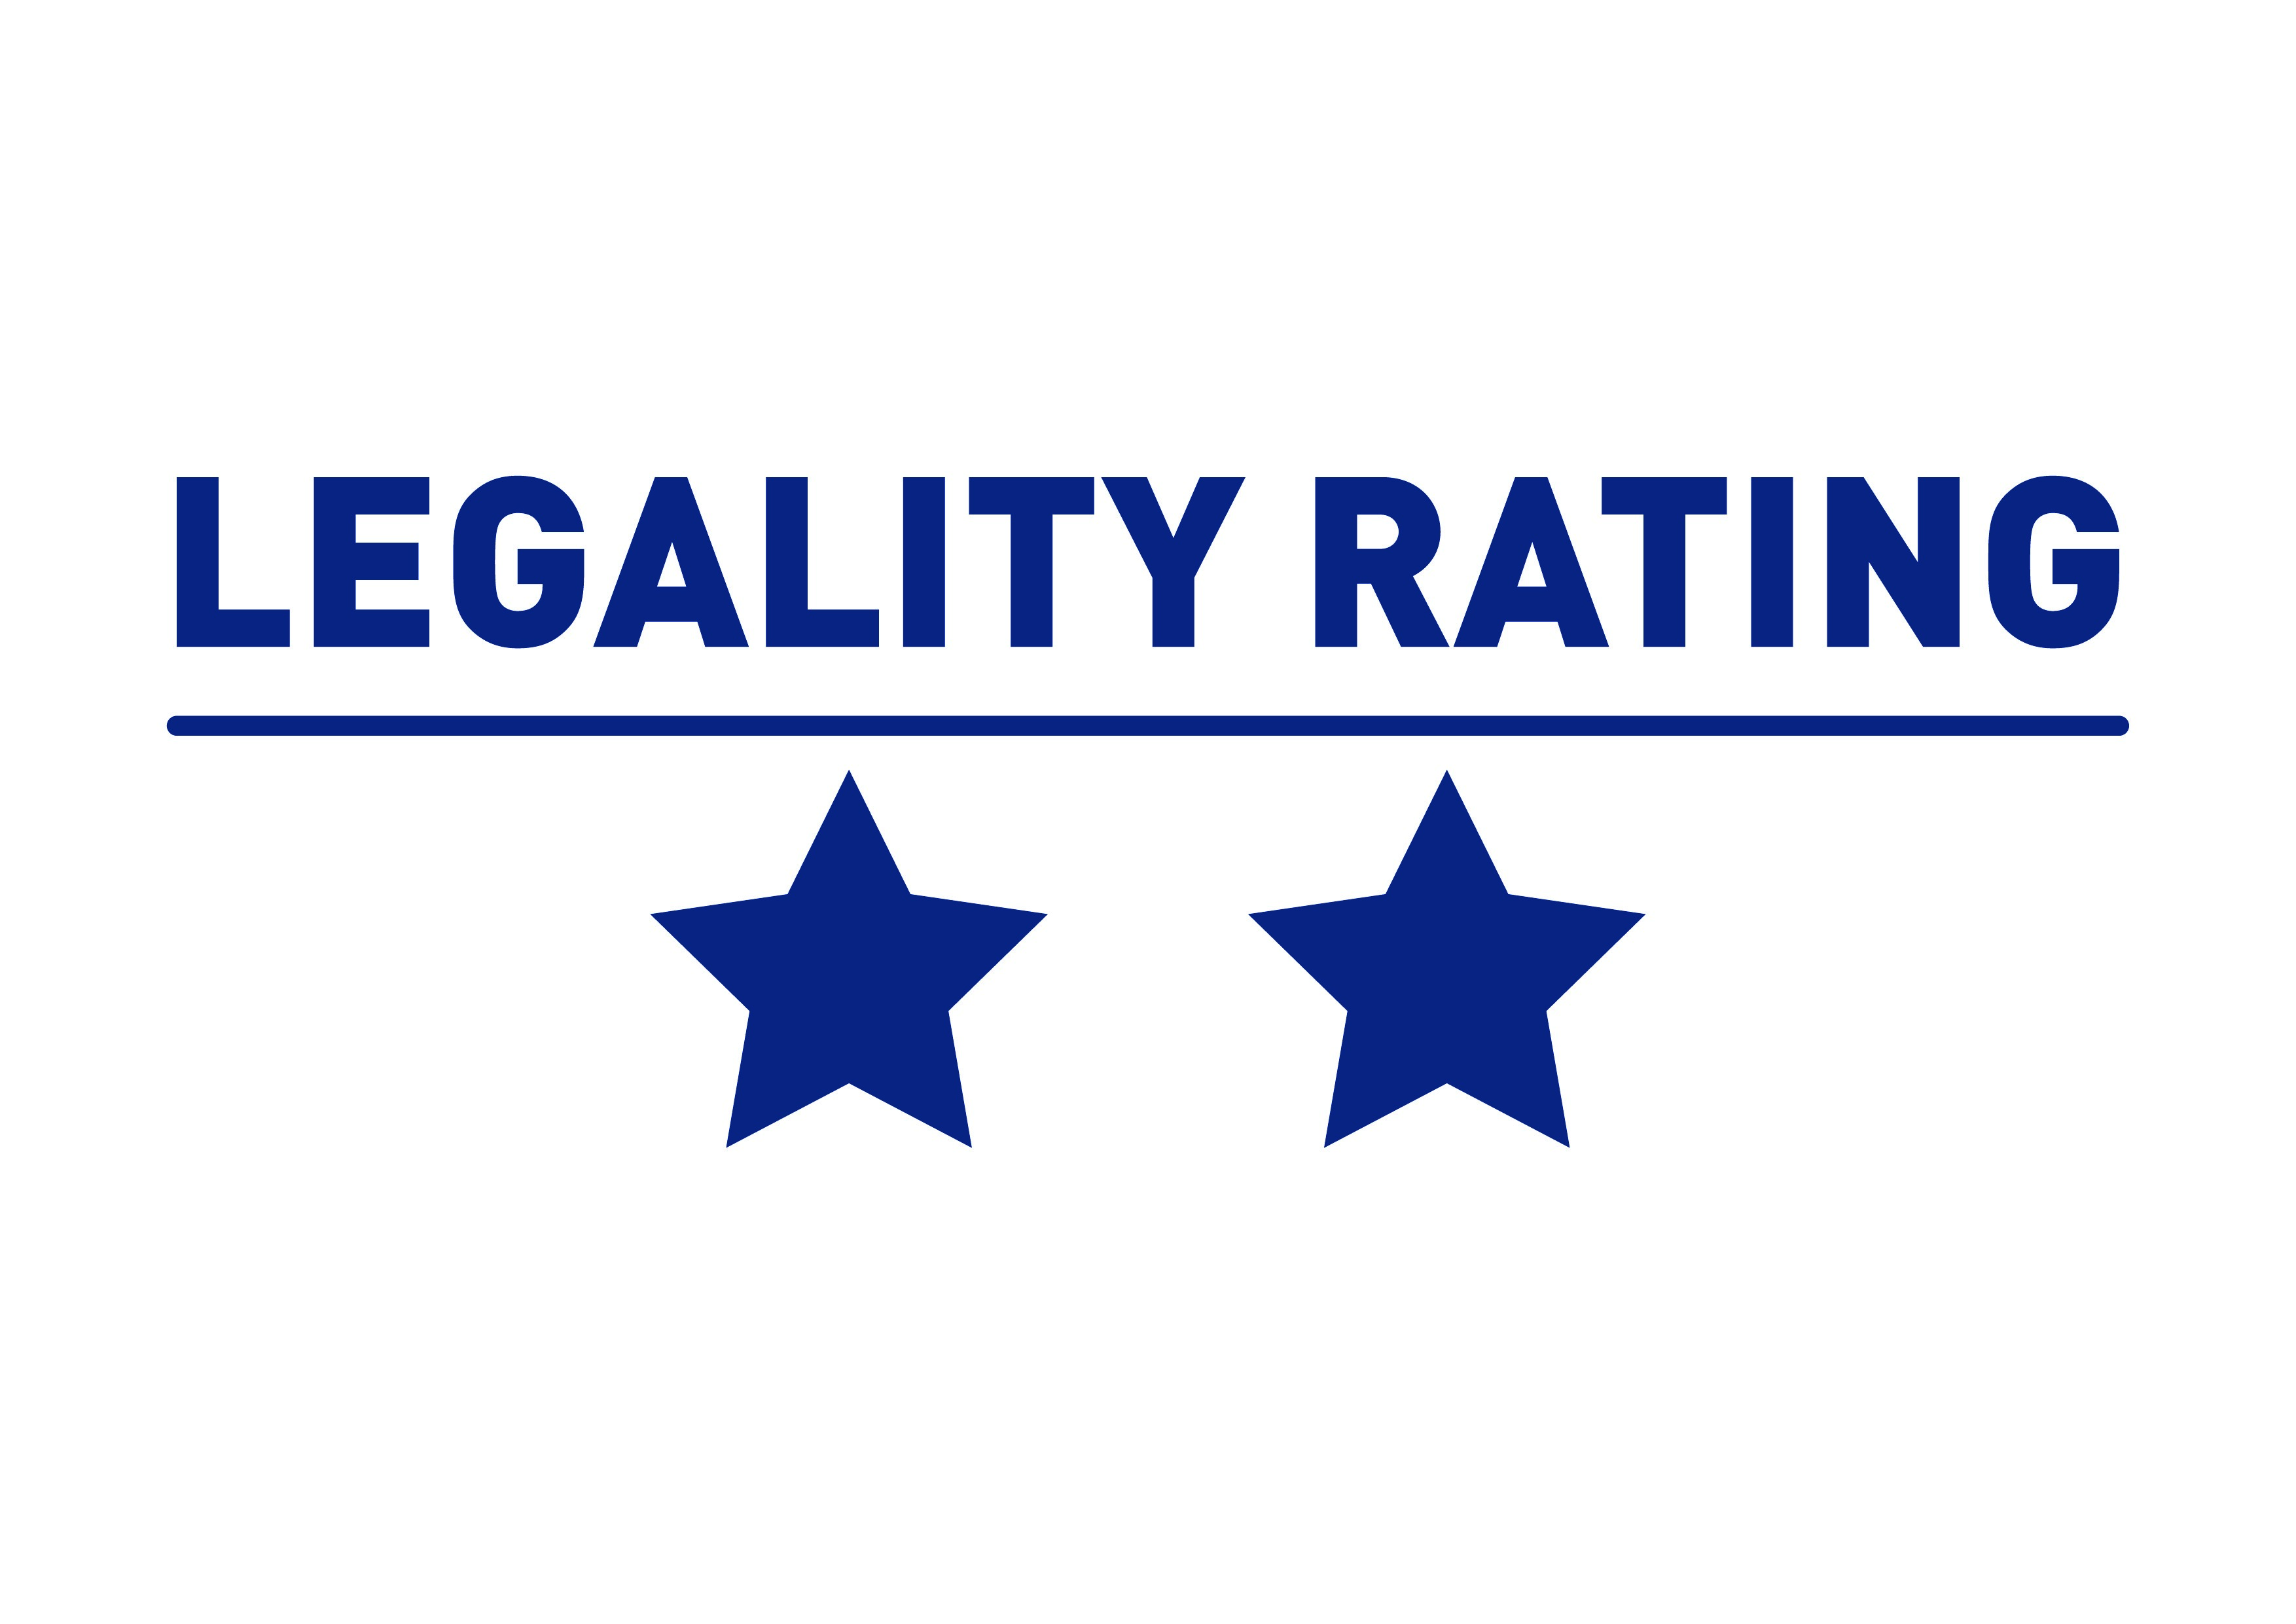 Legality rating